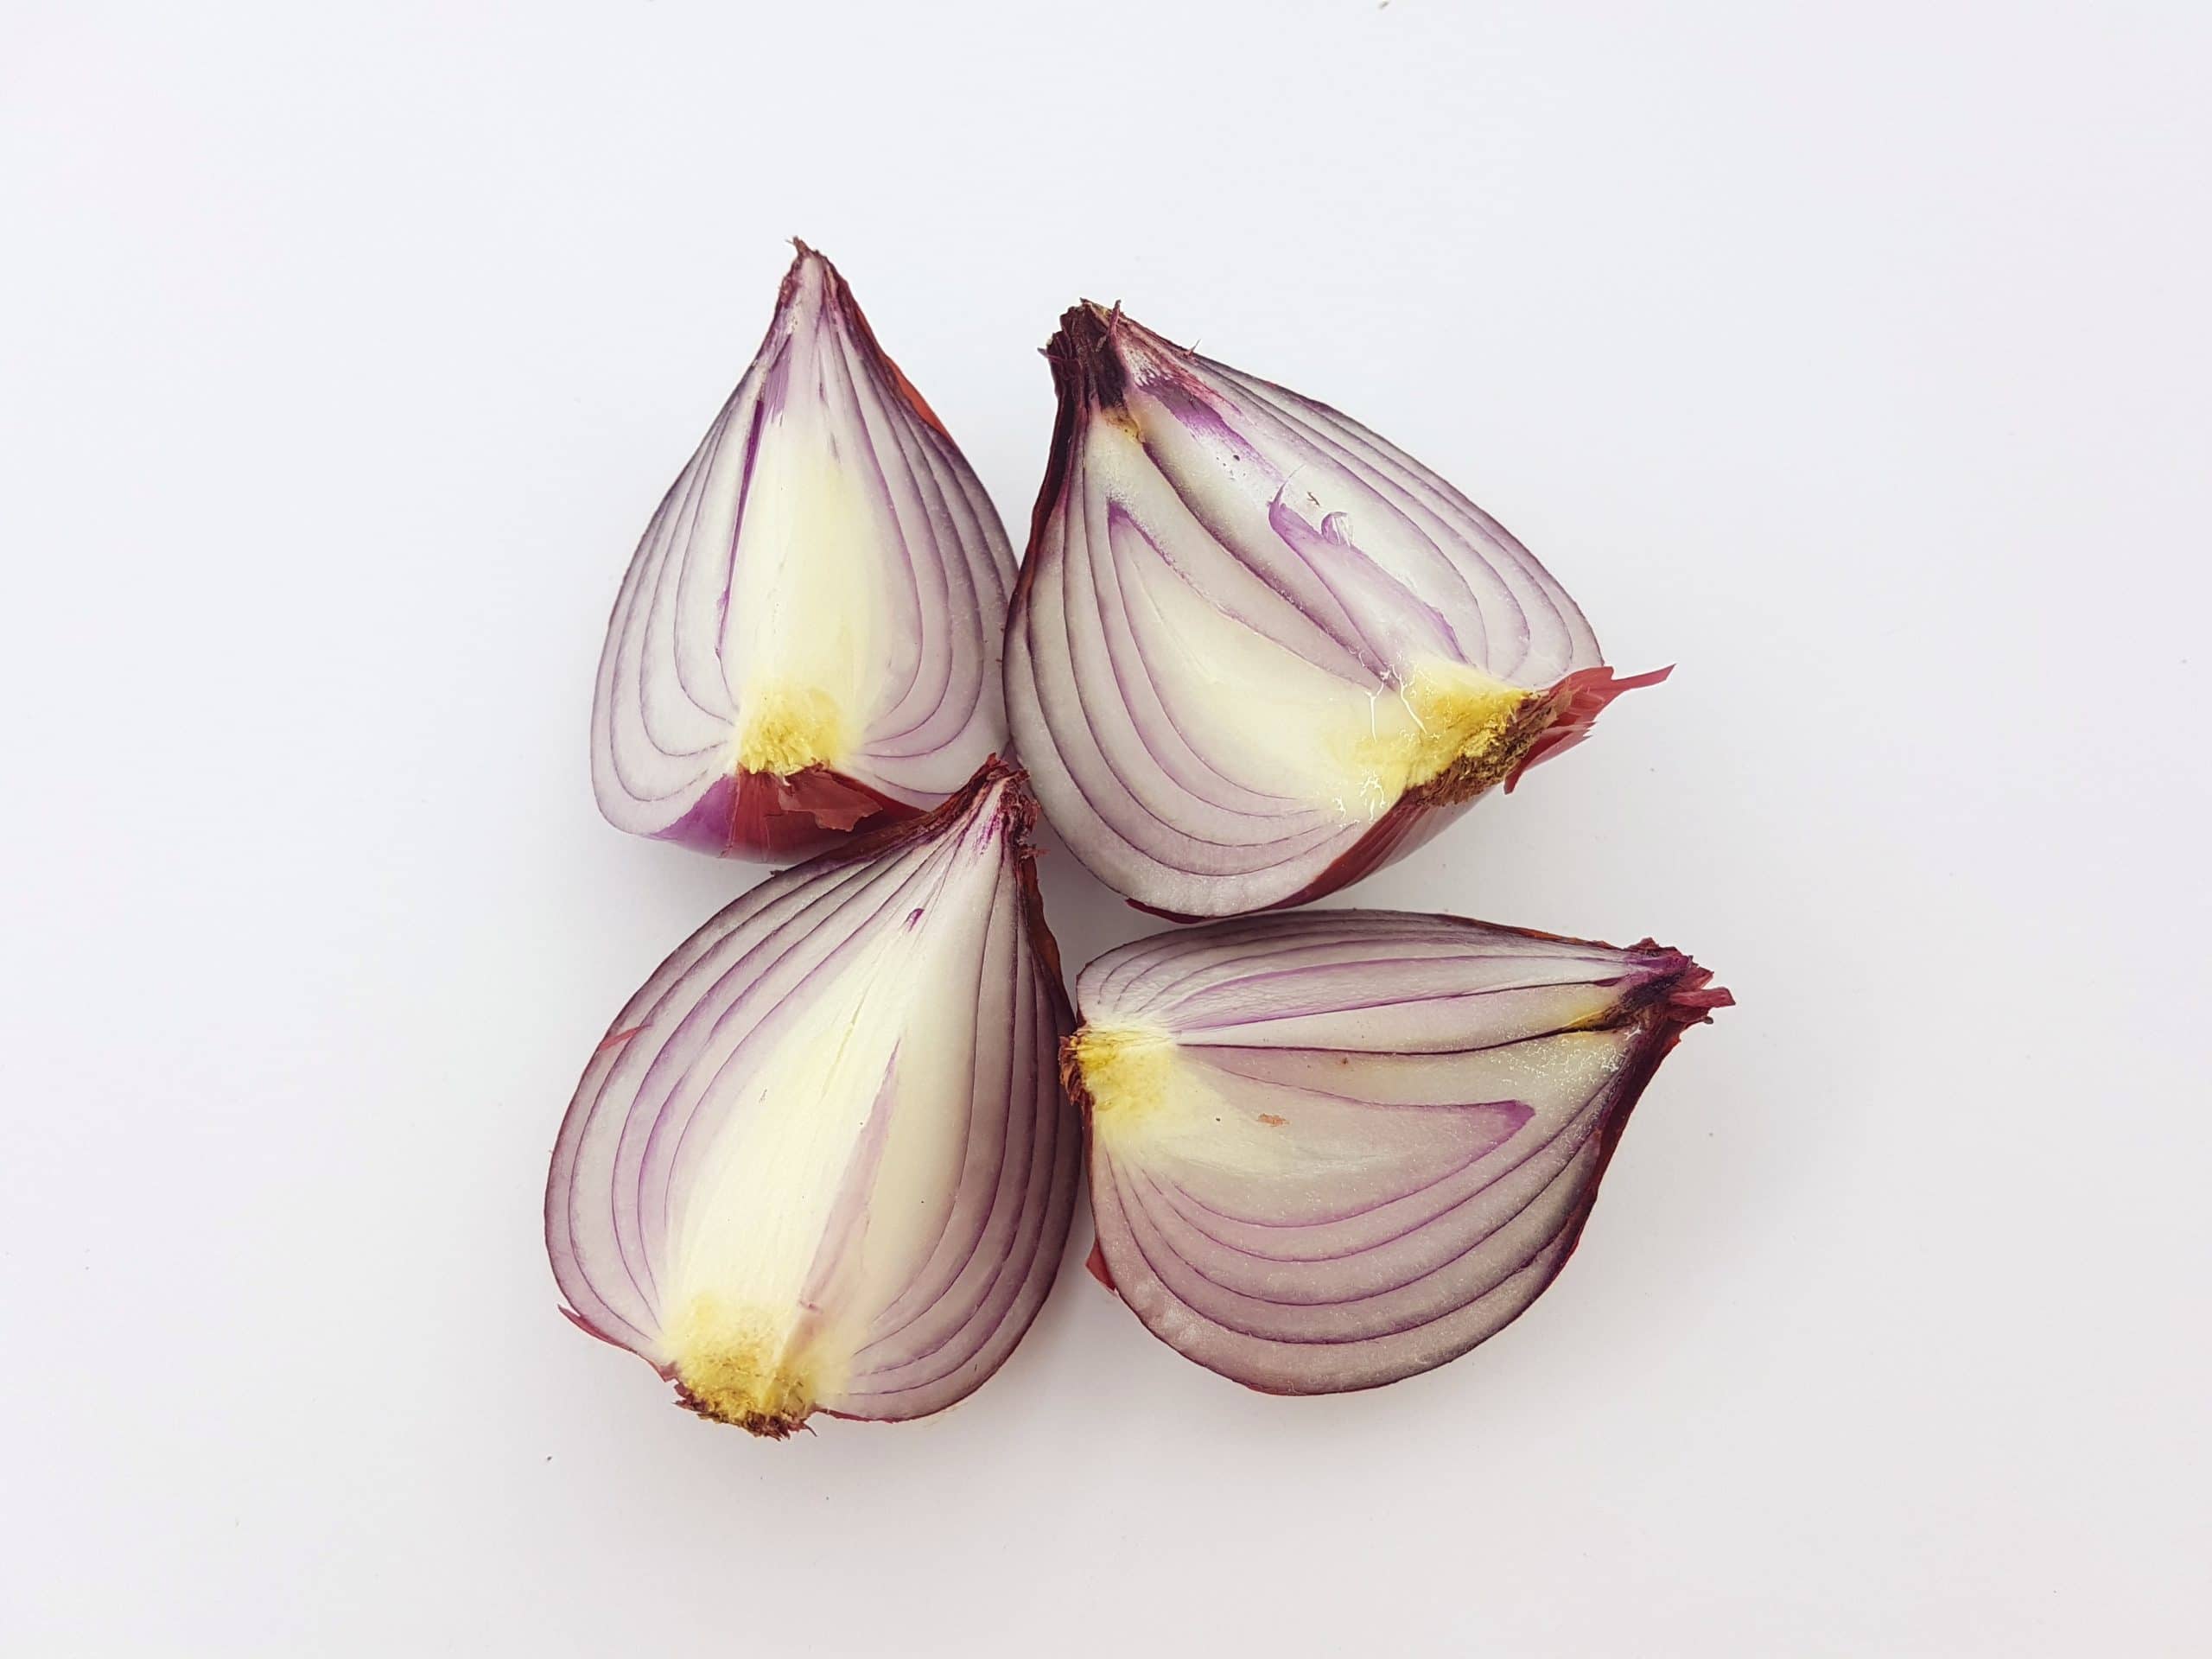 shelf life of cooked onions